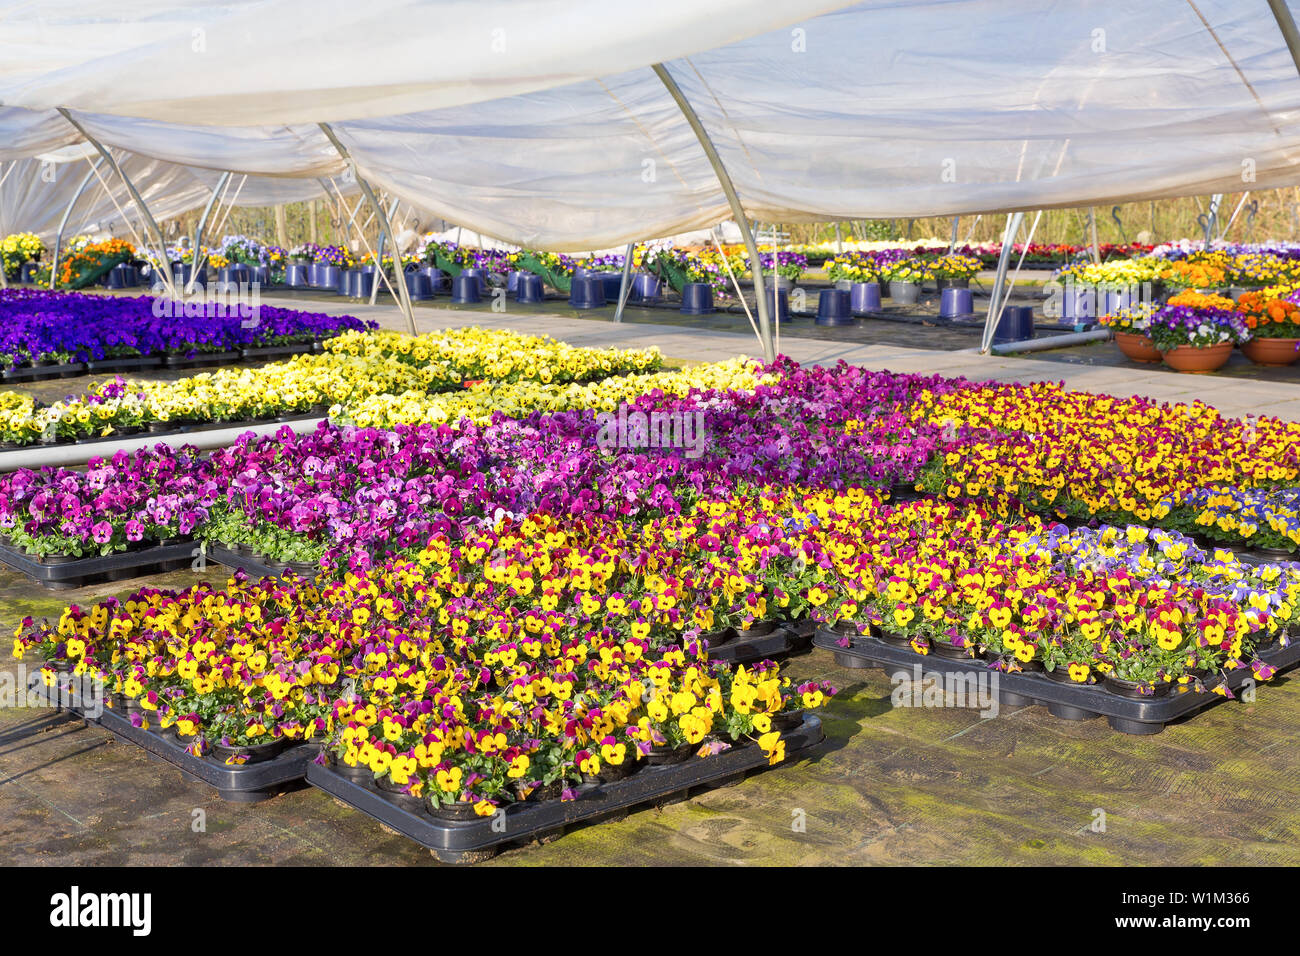 Plastic greenhouse in the Netherlands with colorful flowering pansies in trays Stock Photo